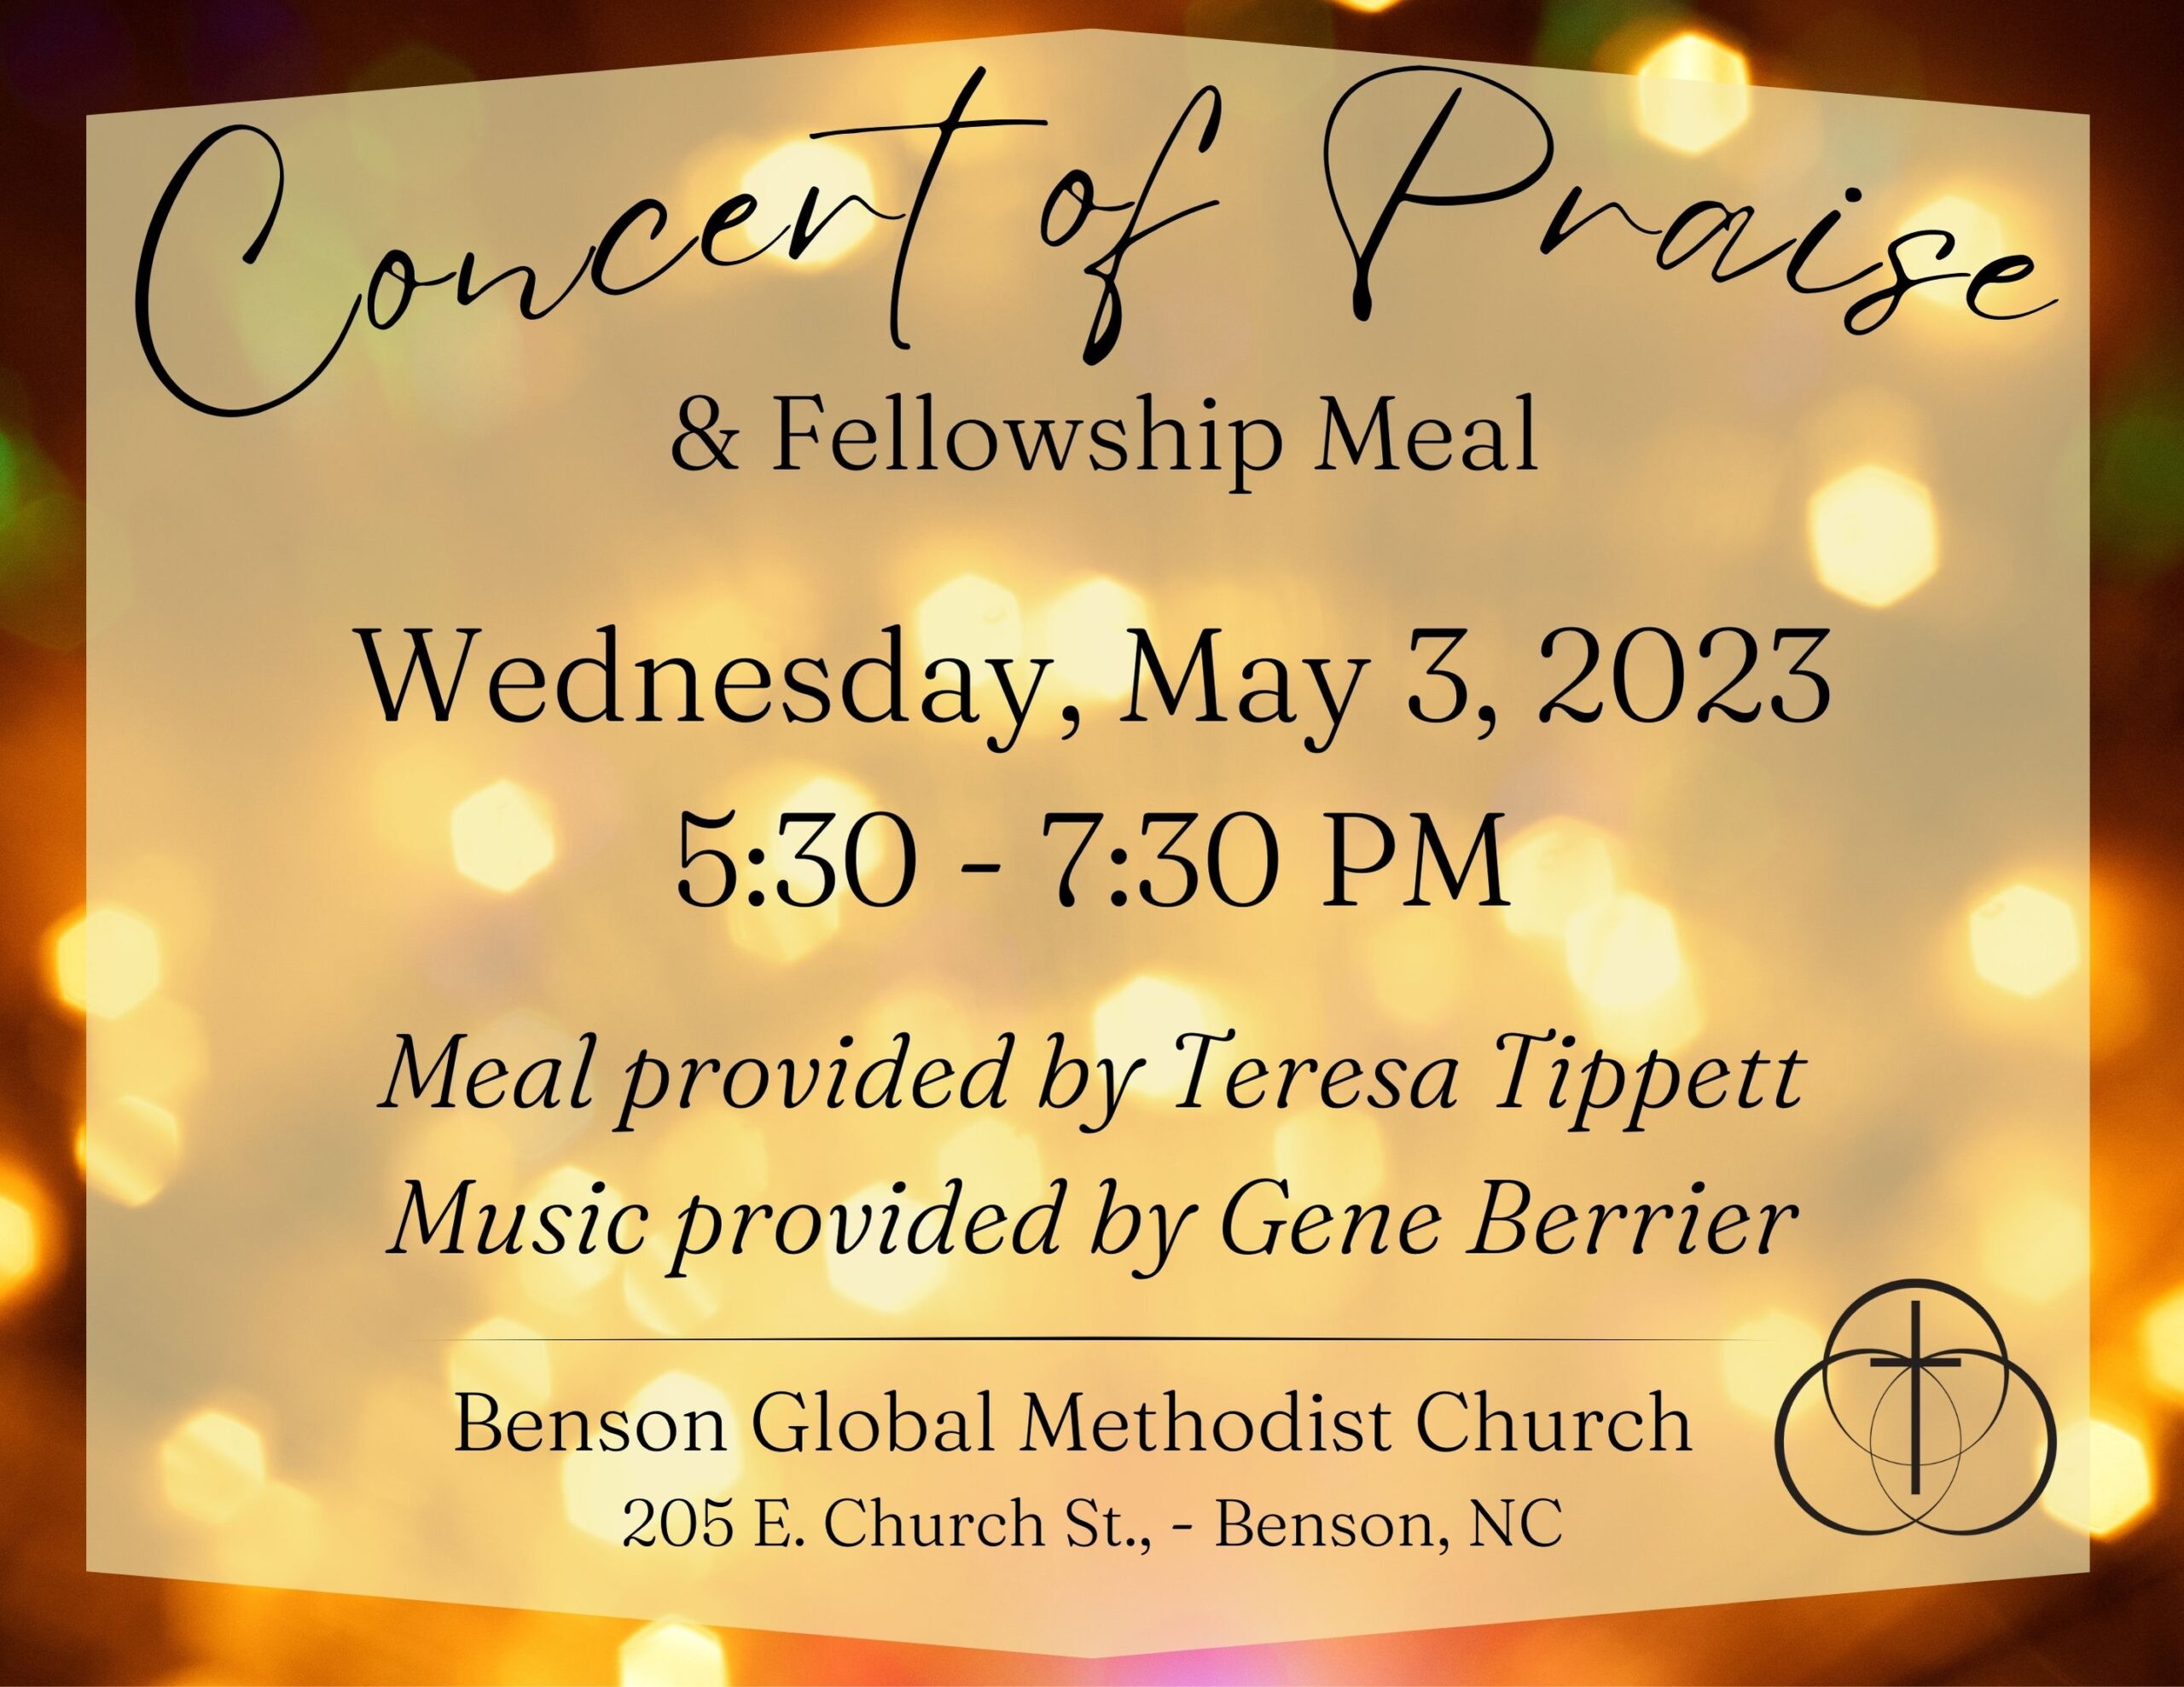 Concert of Praise and Fellowship Meal